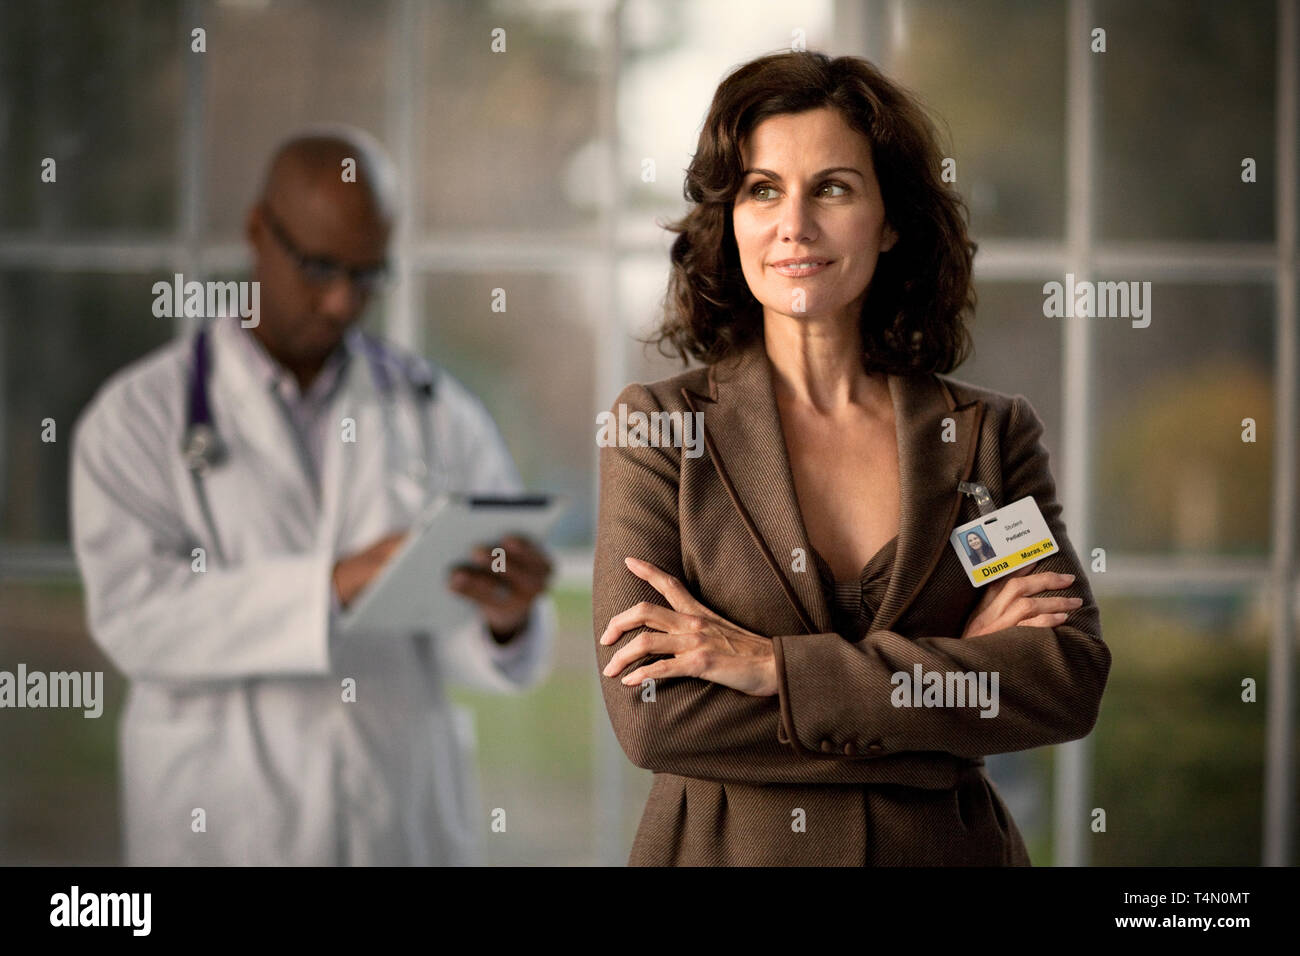 Smiling mid-adult female doctor with her arms crossed. Stock Photo